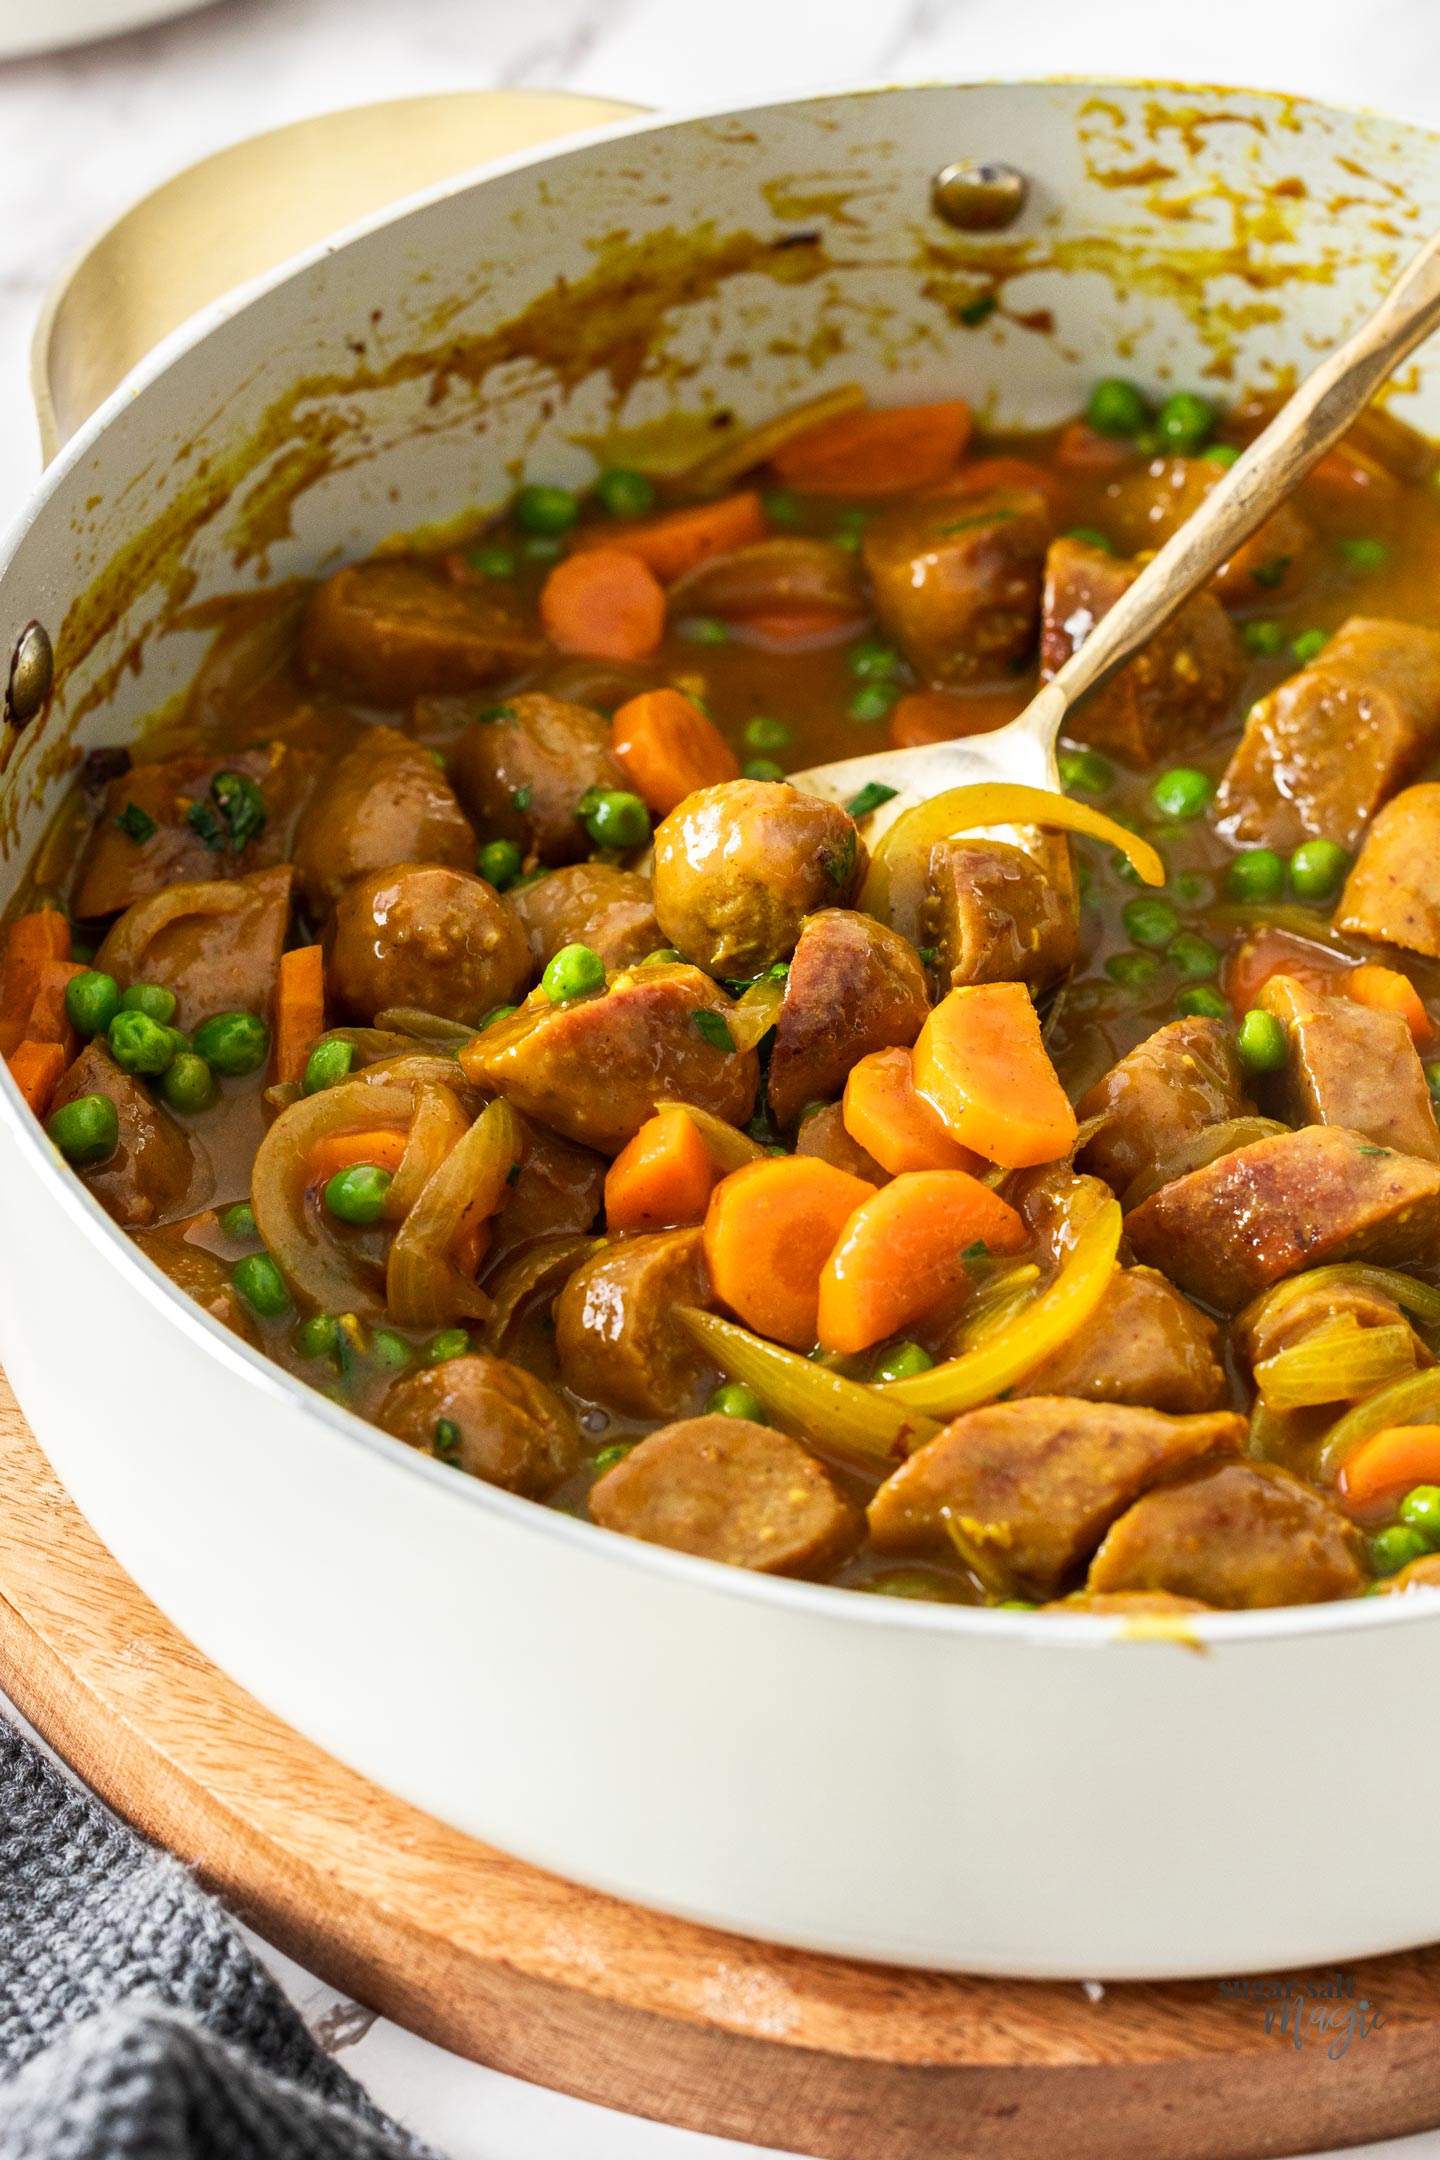 A pan filled with curried sausages.